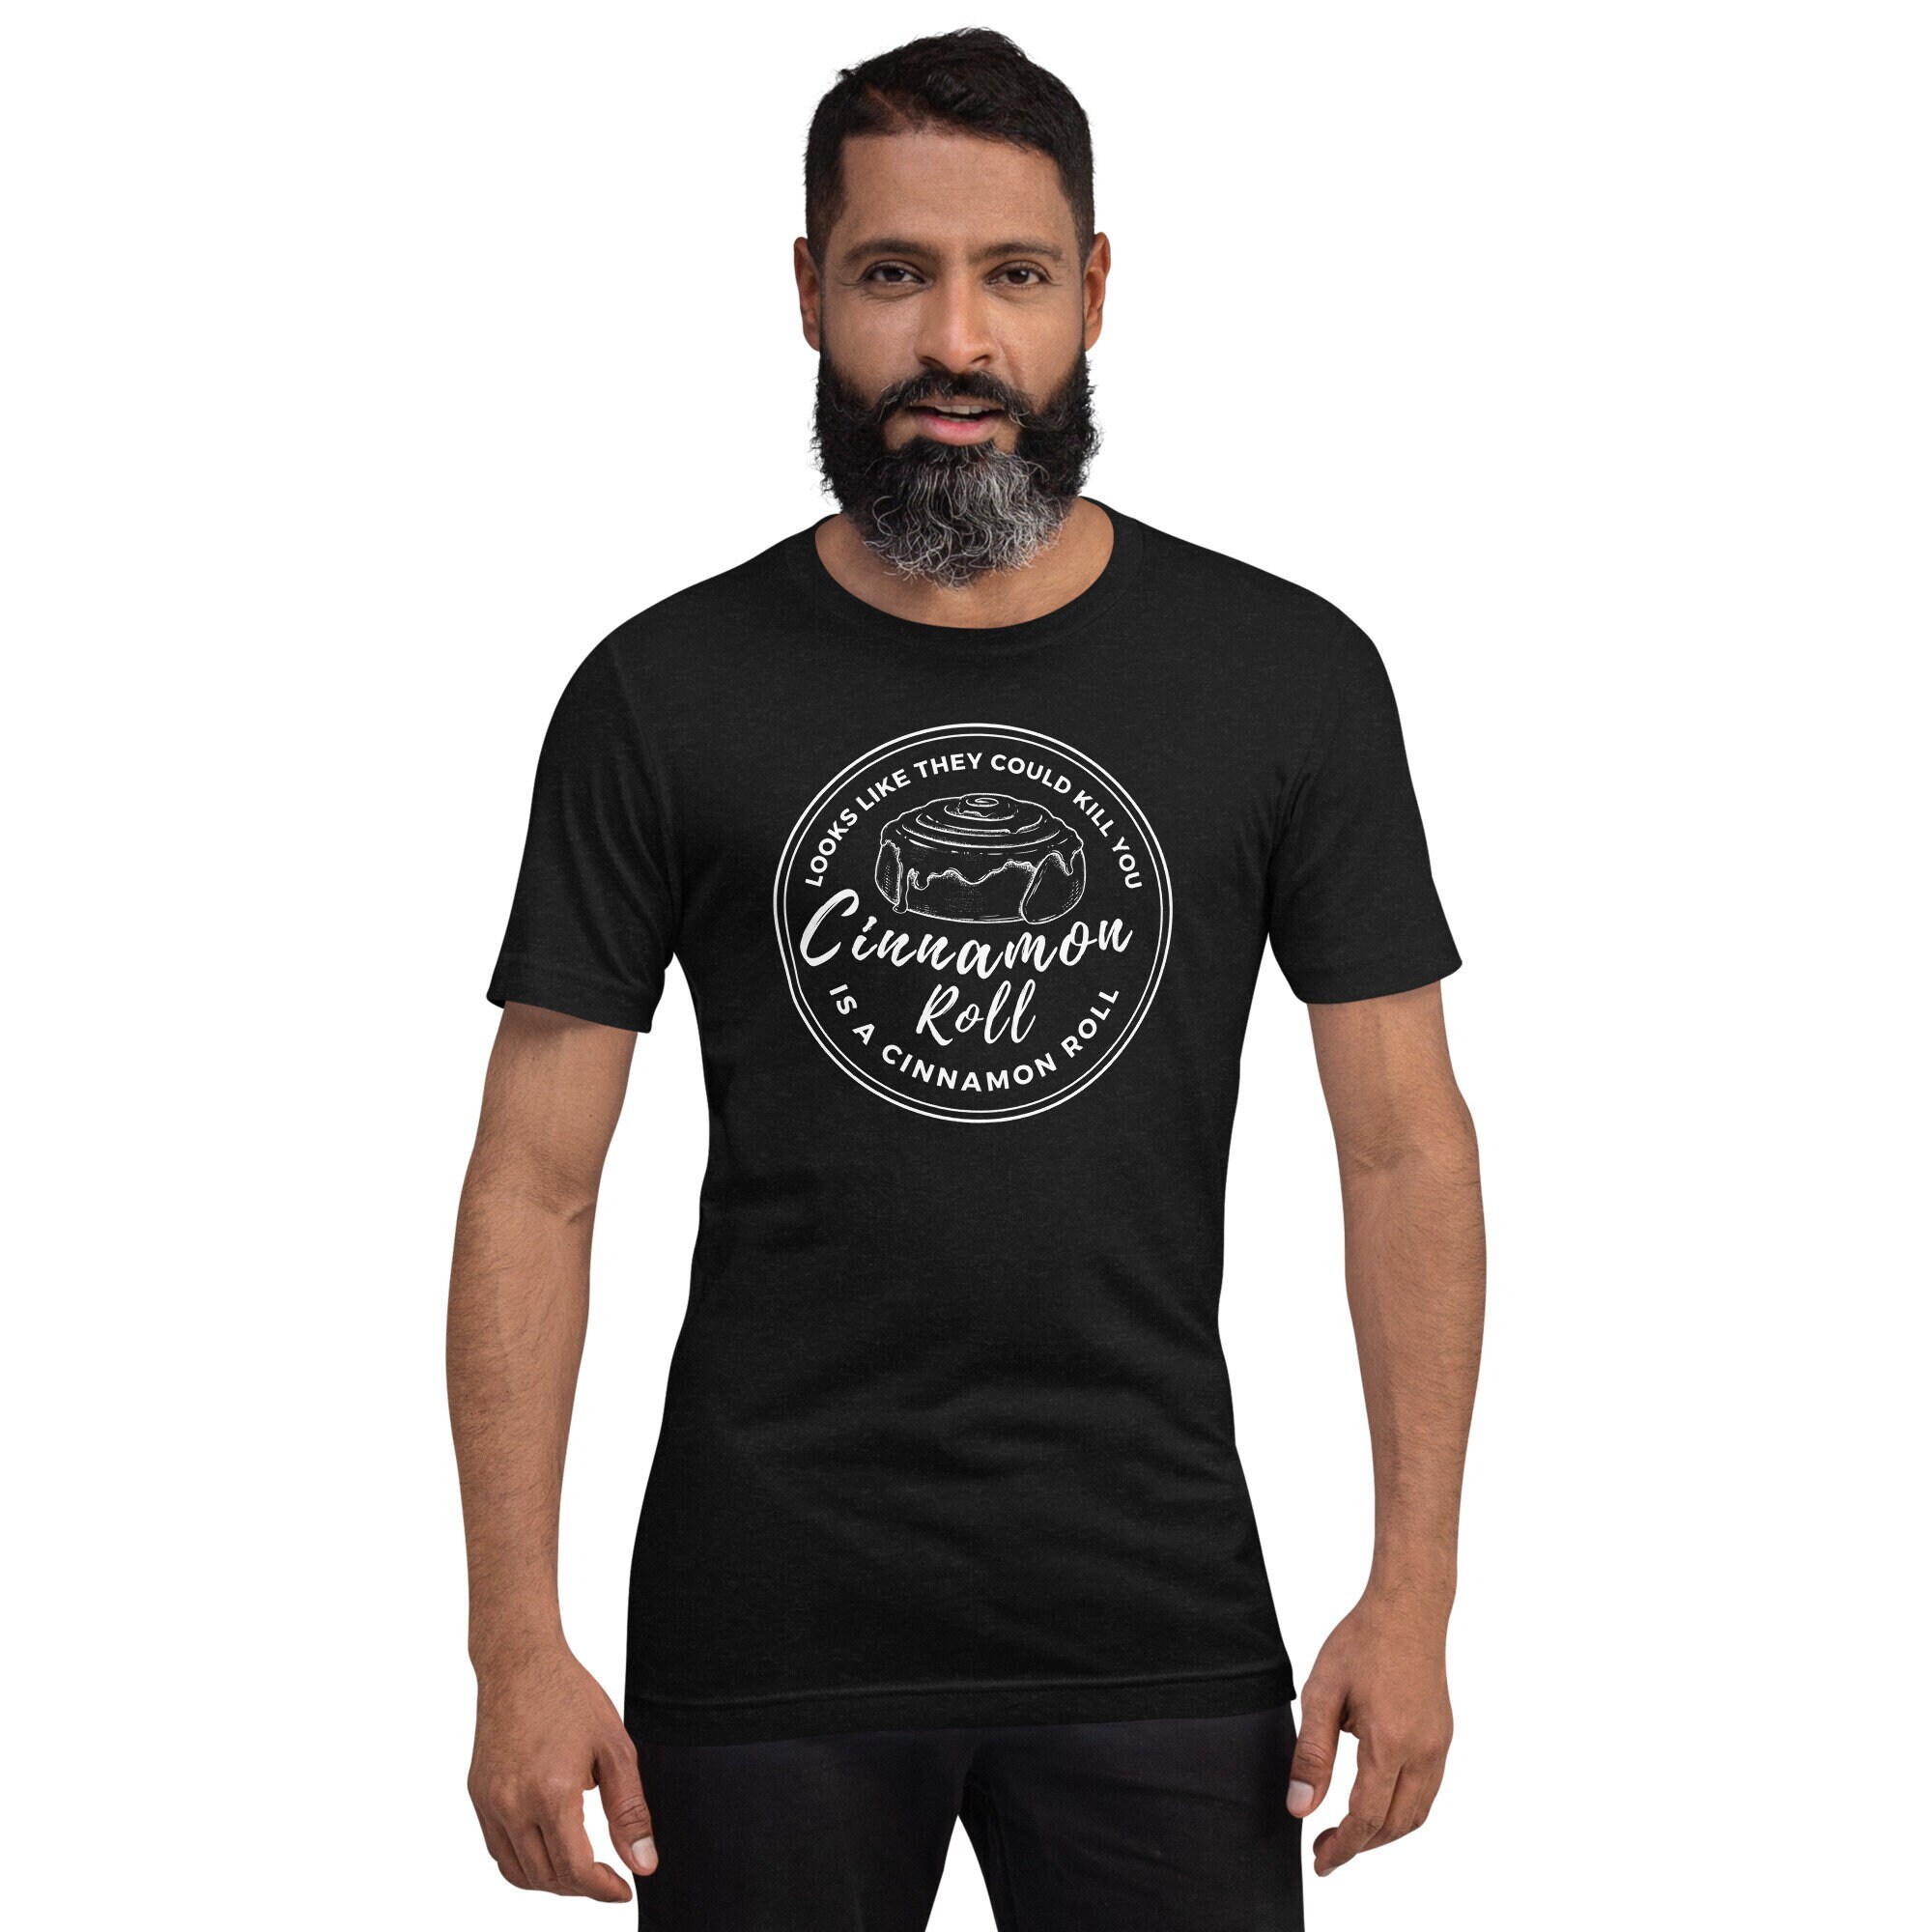 Looks Like They Could Kill You Is A Cinnamon Roll Unisex Etsy